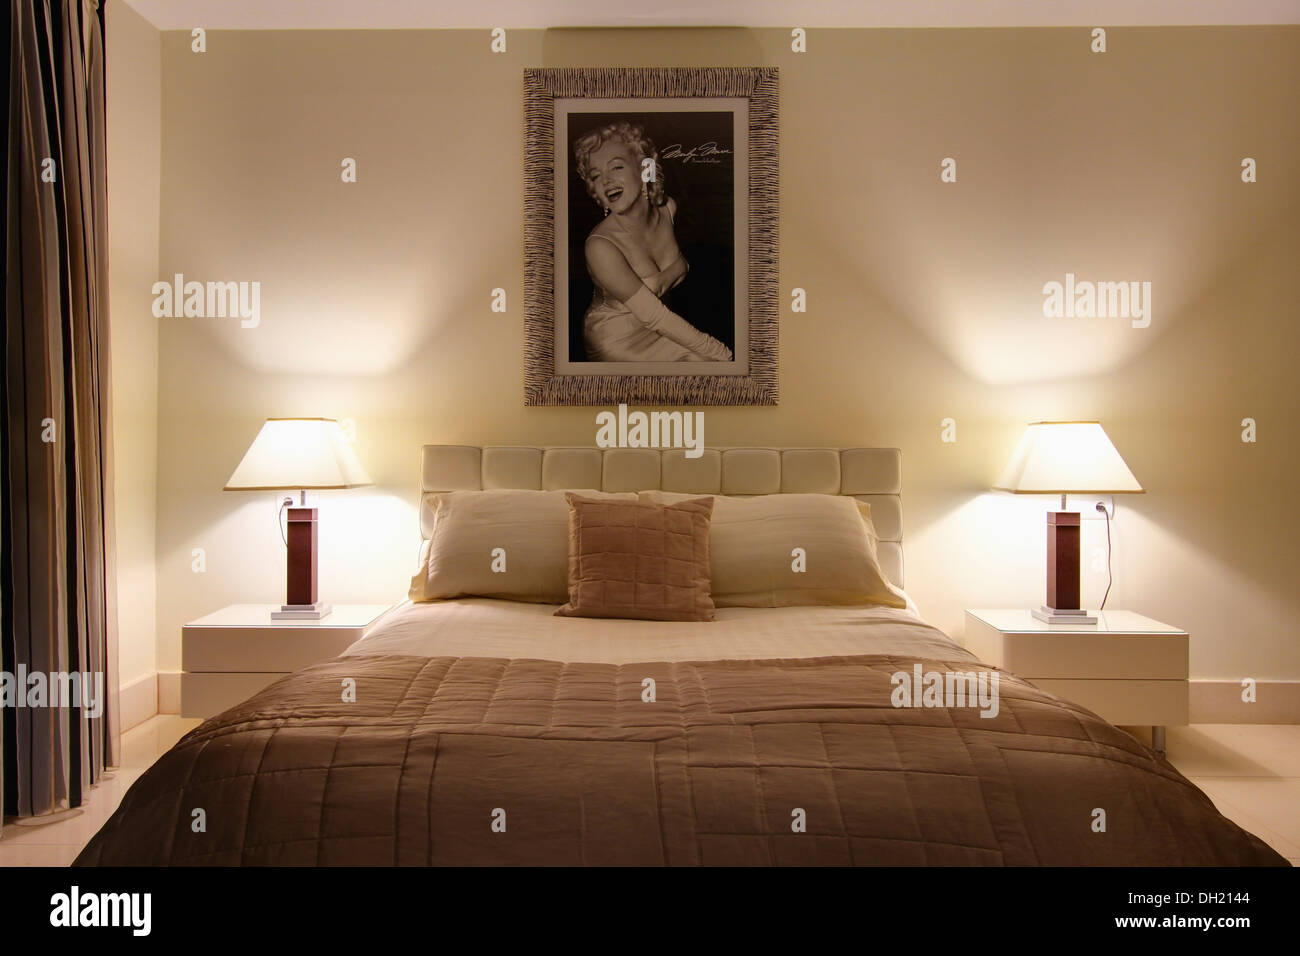 Framed Picture Of Marilyn Monroe Above Bed With Beige Quilt In